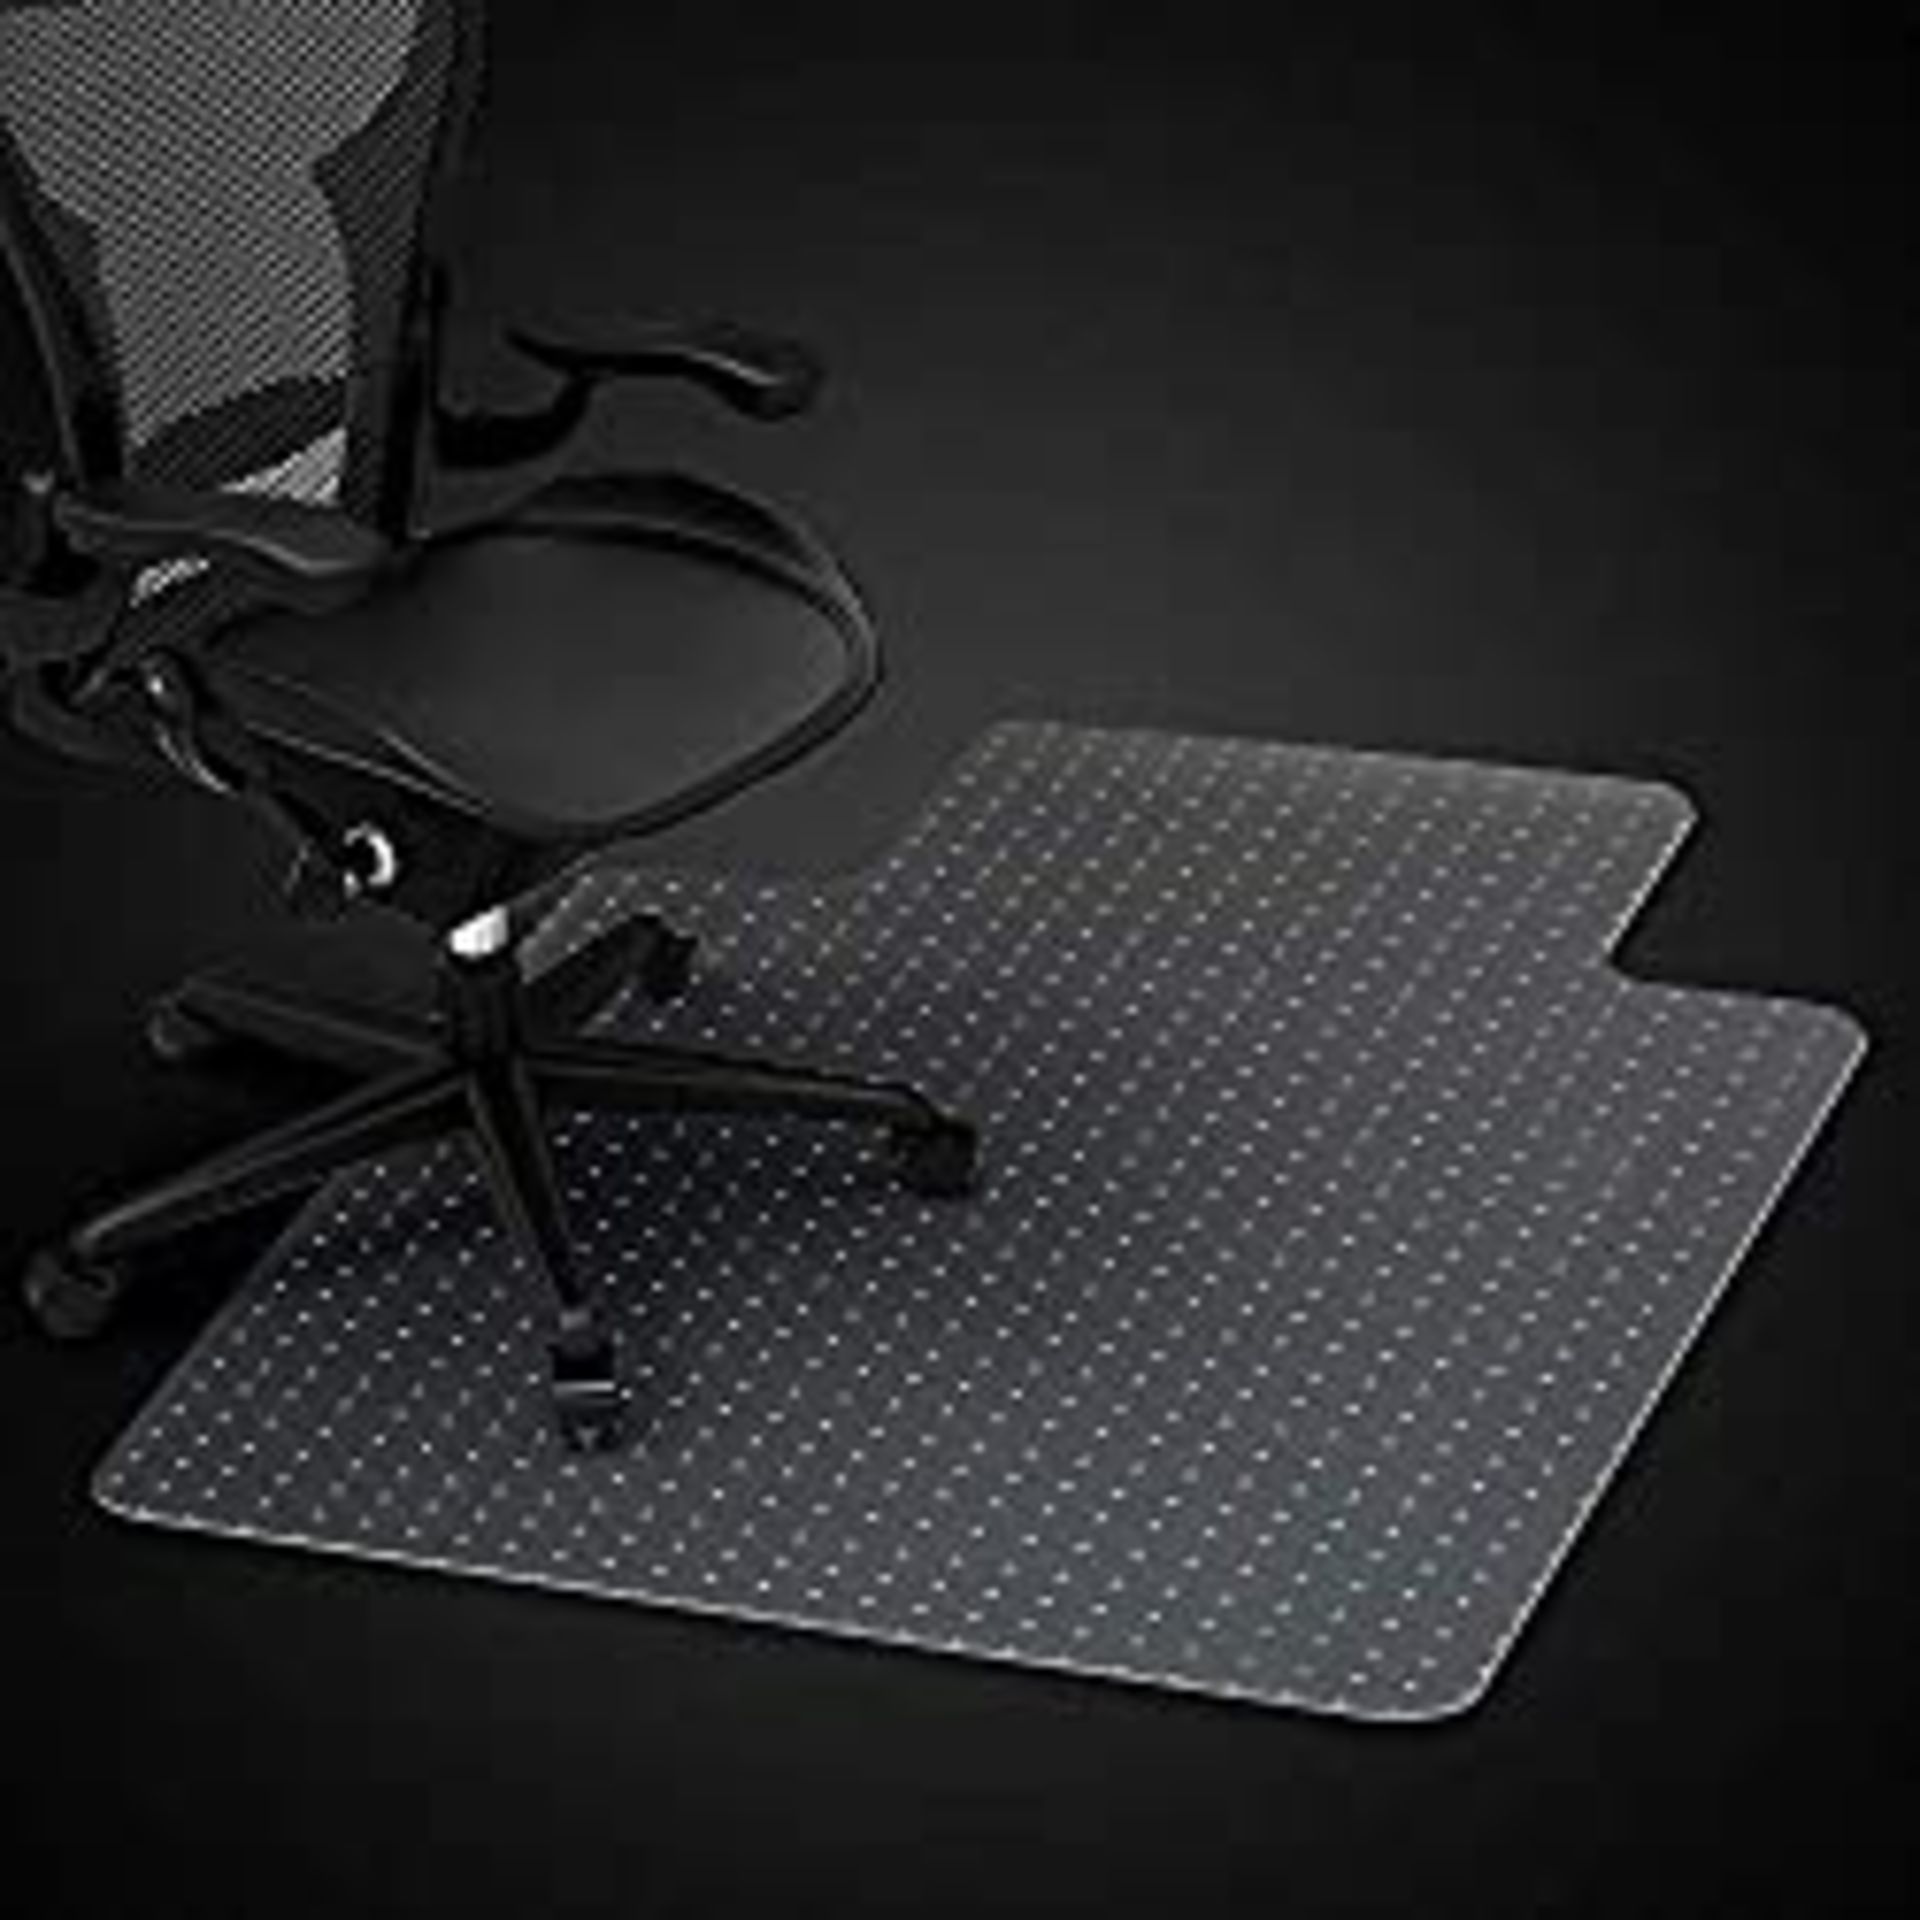 RRP £33.49 Azadx Clear Chair Mat for Low/No Pile Carpeted Floor